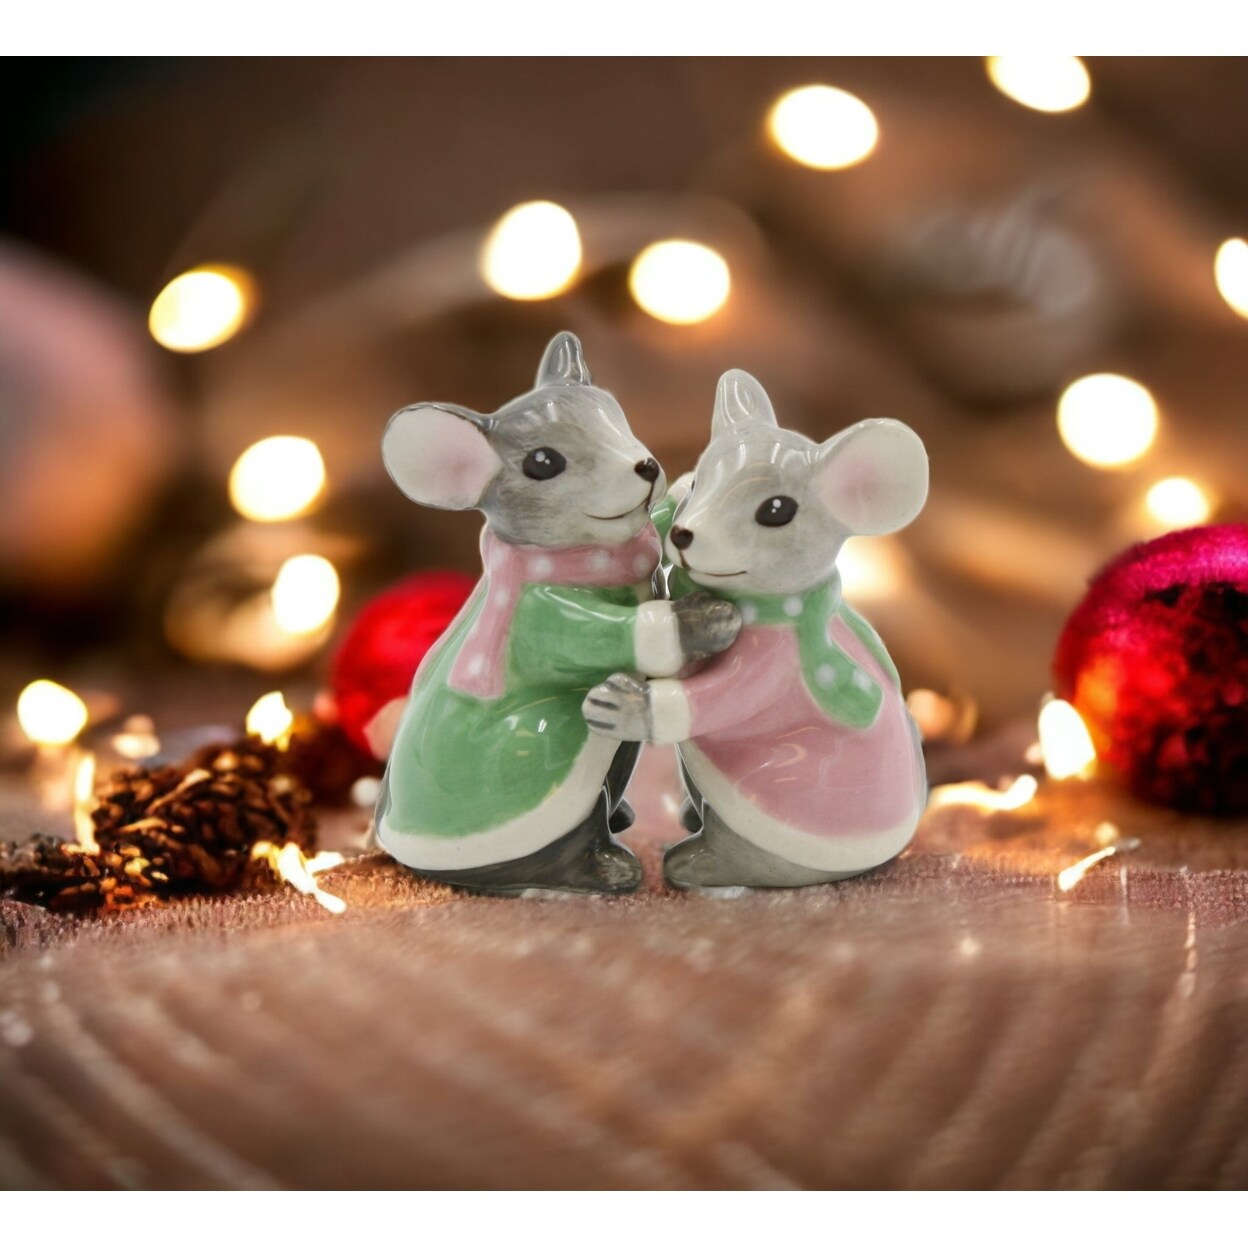 kevinsgiftshoppe Pastel Color Ceramic Christmas Mice Salt And Pepper Shakers Home Decor   Kitchen Decor Christmas Decor